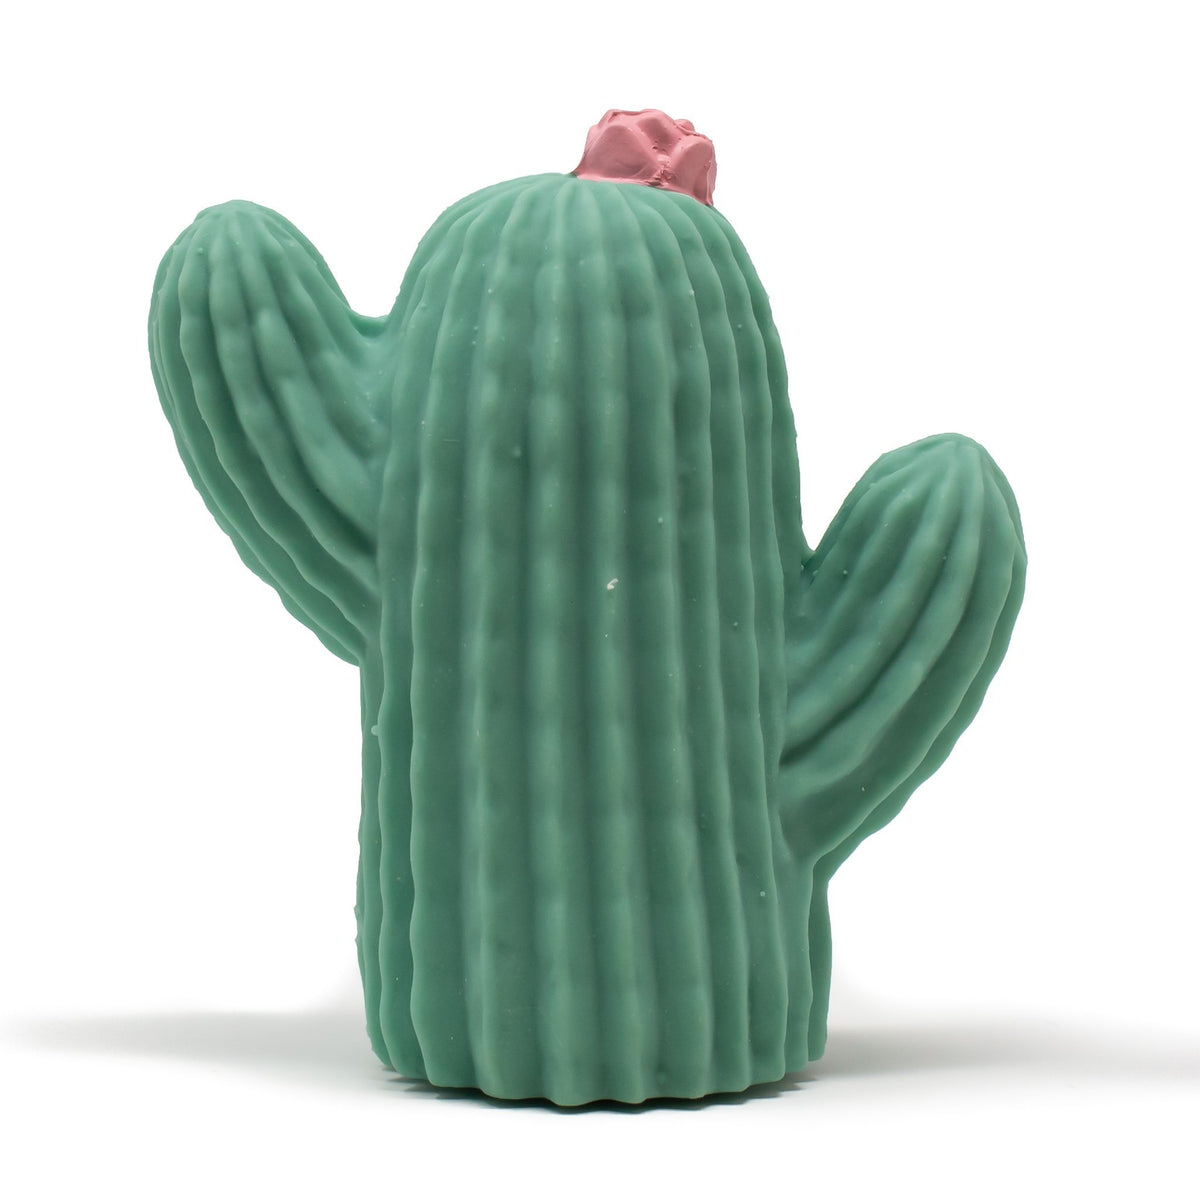 Teething Toys Babies - Cactus Green the Teether | Natural Rubber Toys